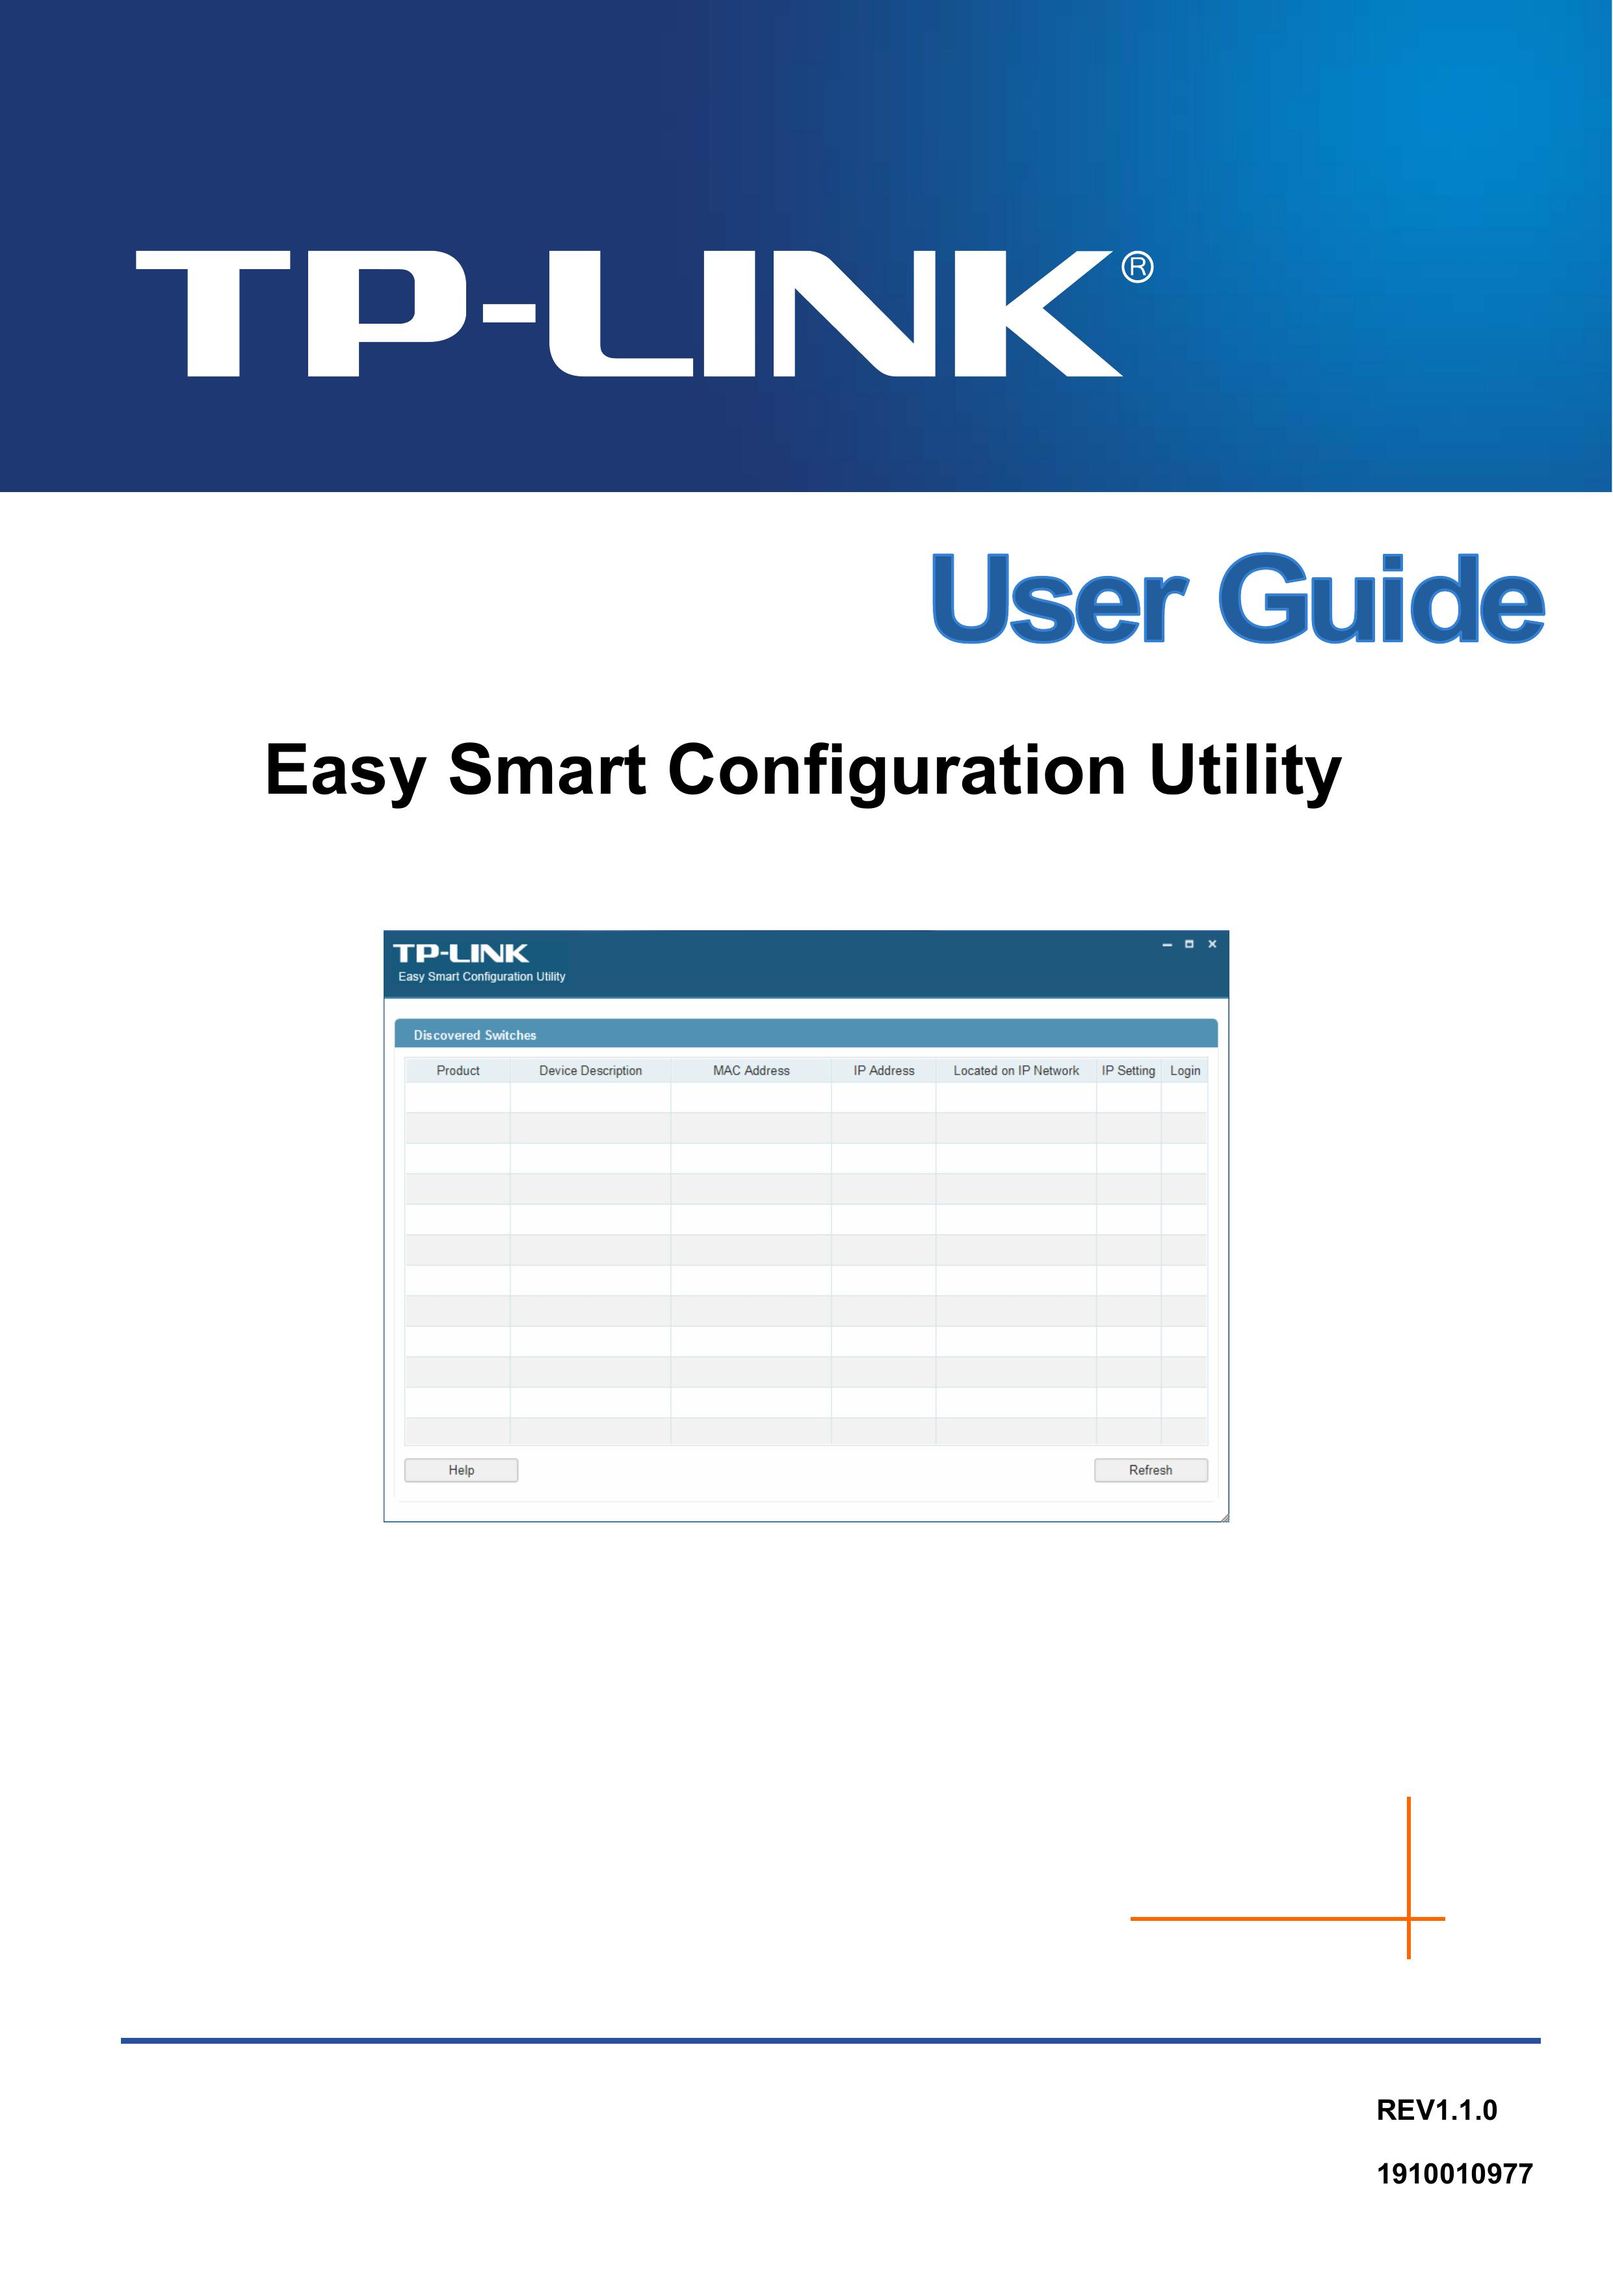 TP-Link 1910010977 Cell Phone User Manual